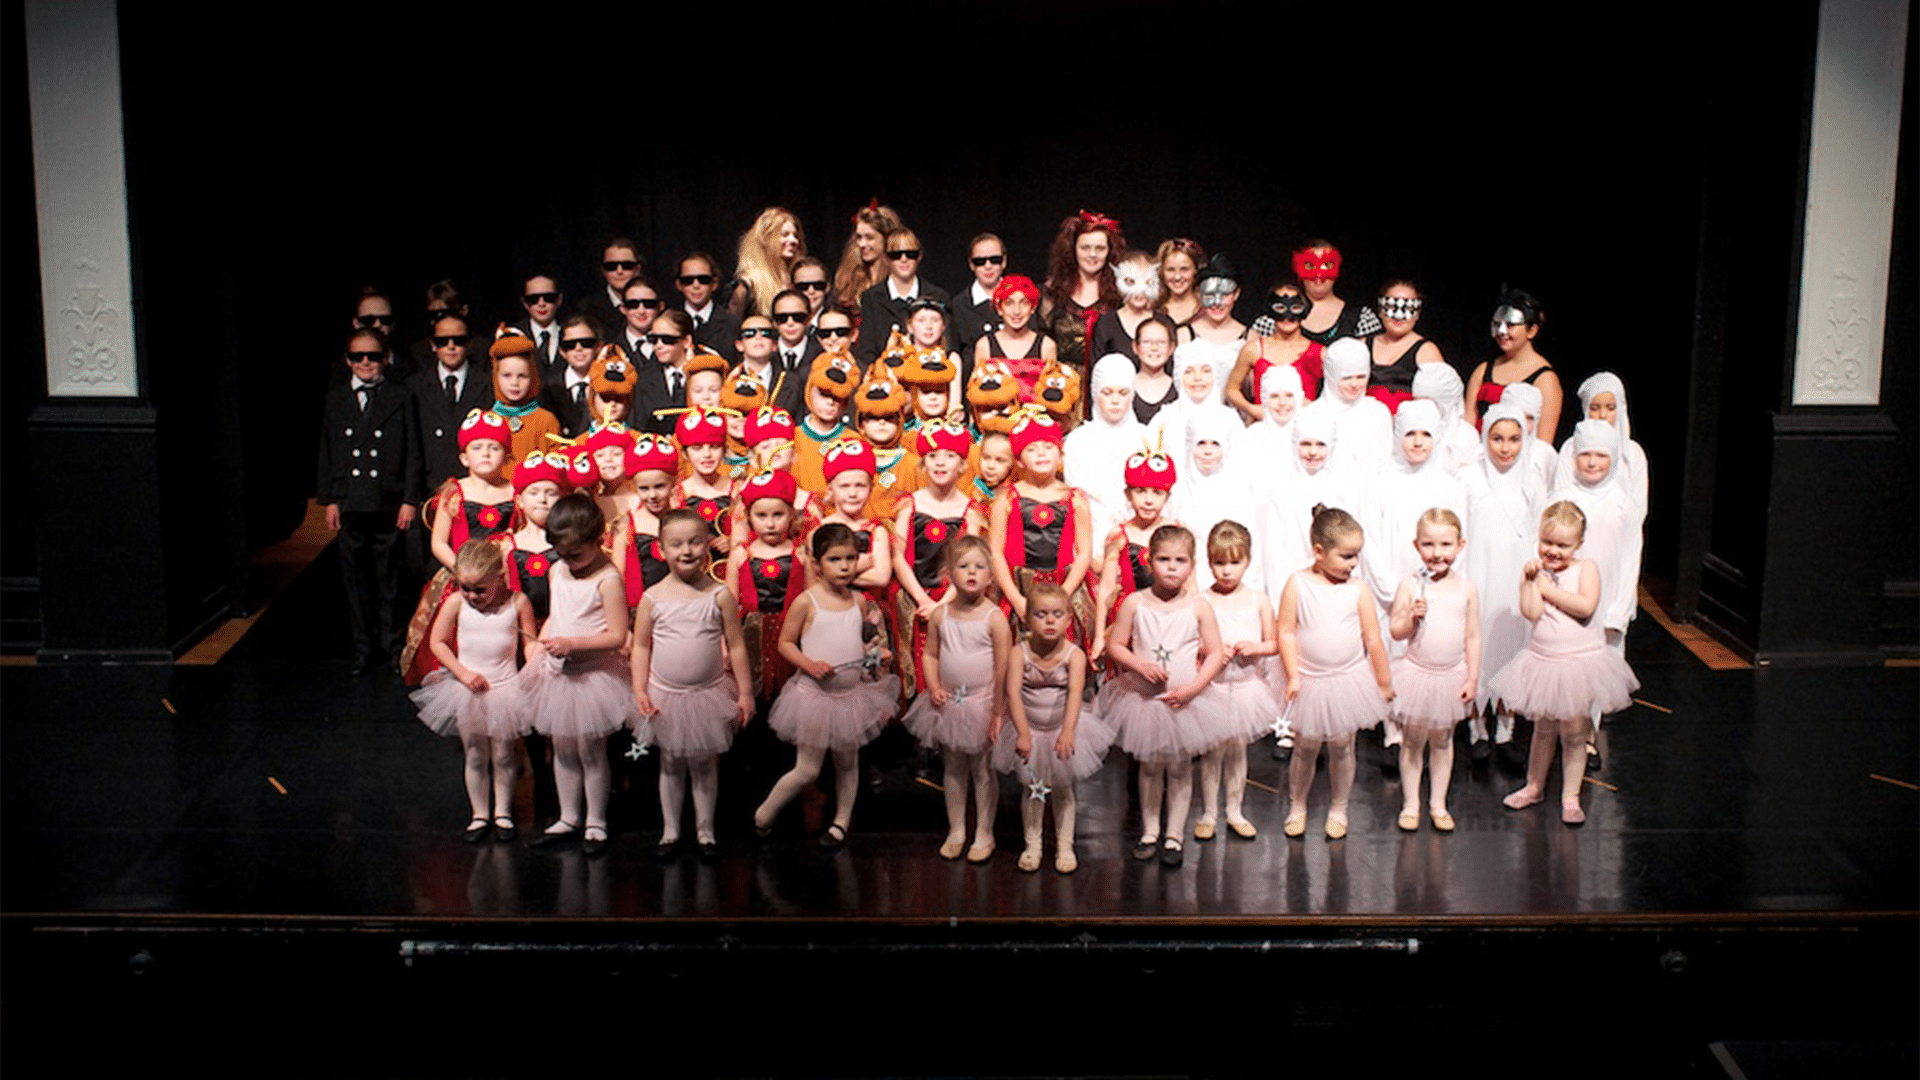 Topsham School of Dance promotional image. Background: The Barnfield Theatre stage. Black backdrop sided by two white pillars. A wooden stage. Foreground: A mixed group of young dancers wearing a variety of fancy dress costumes.